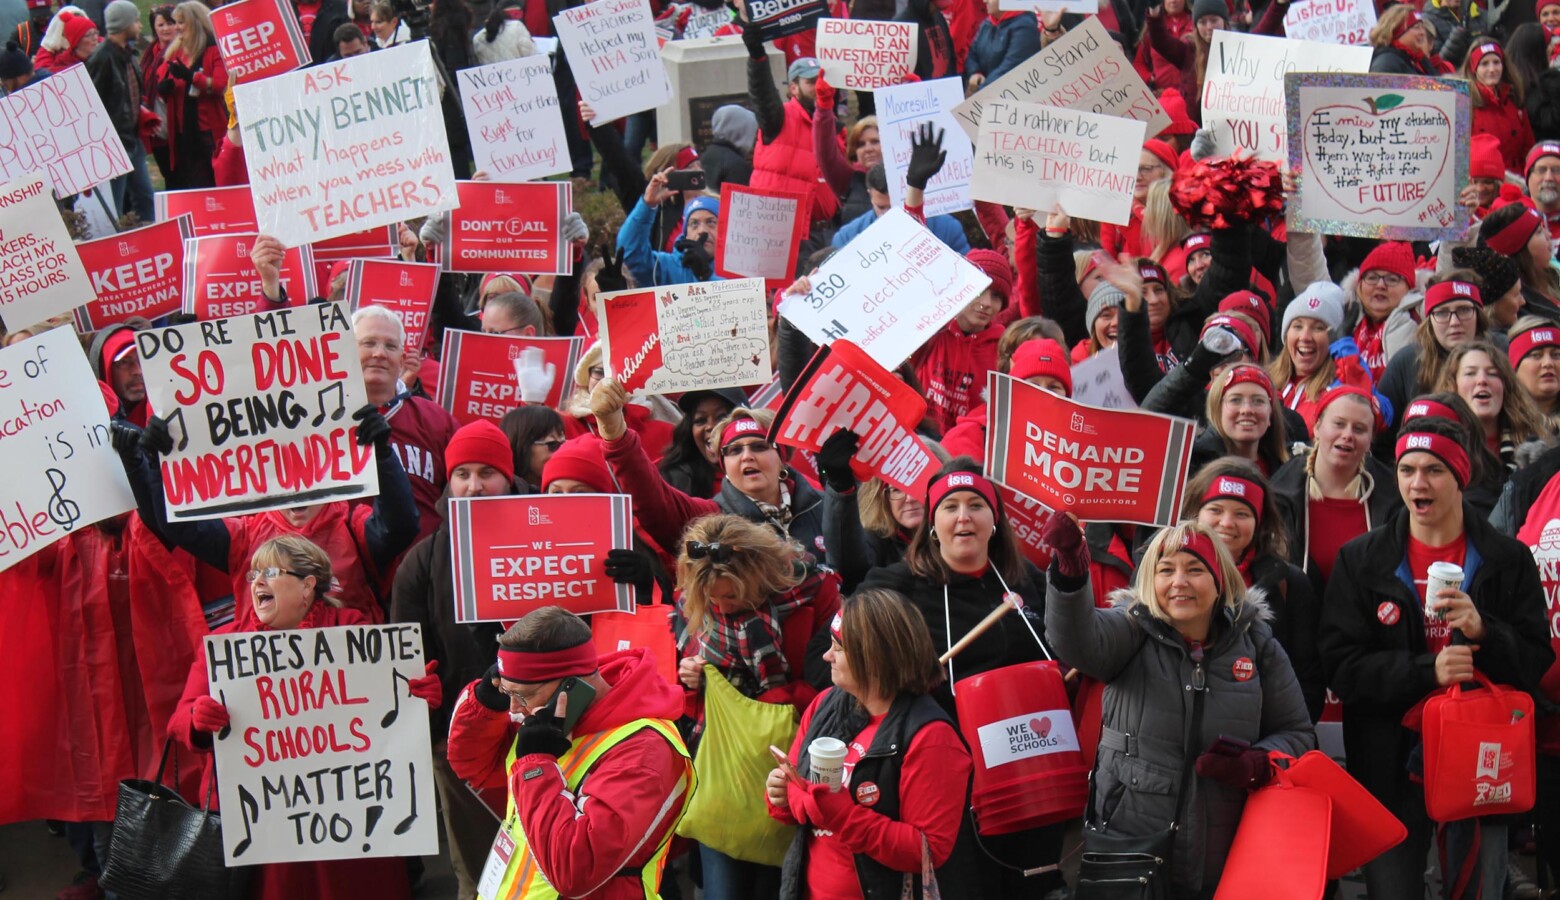 The Indiana State Teachers Association helped organize a massive educator and public school-focused rally at the Statehouse last year, to draw more attention to school funding and teacher compensation needs across the state. (Lauren Chapman/IPB News)